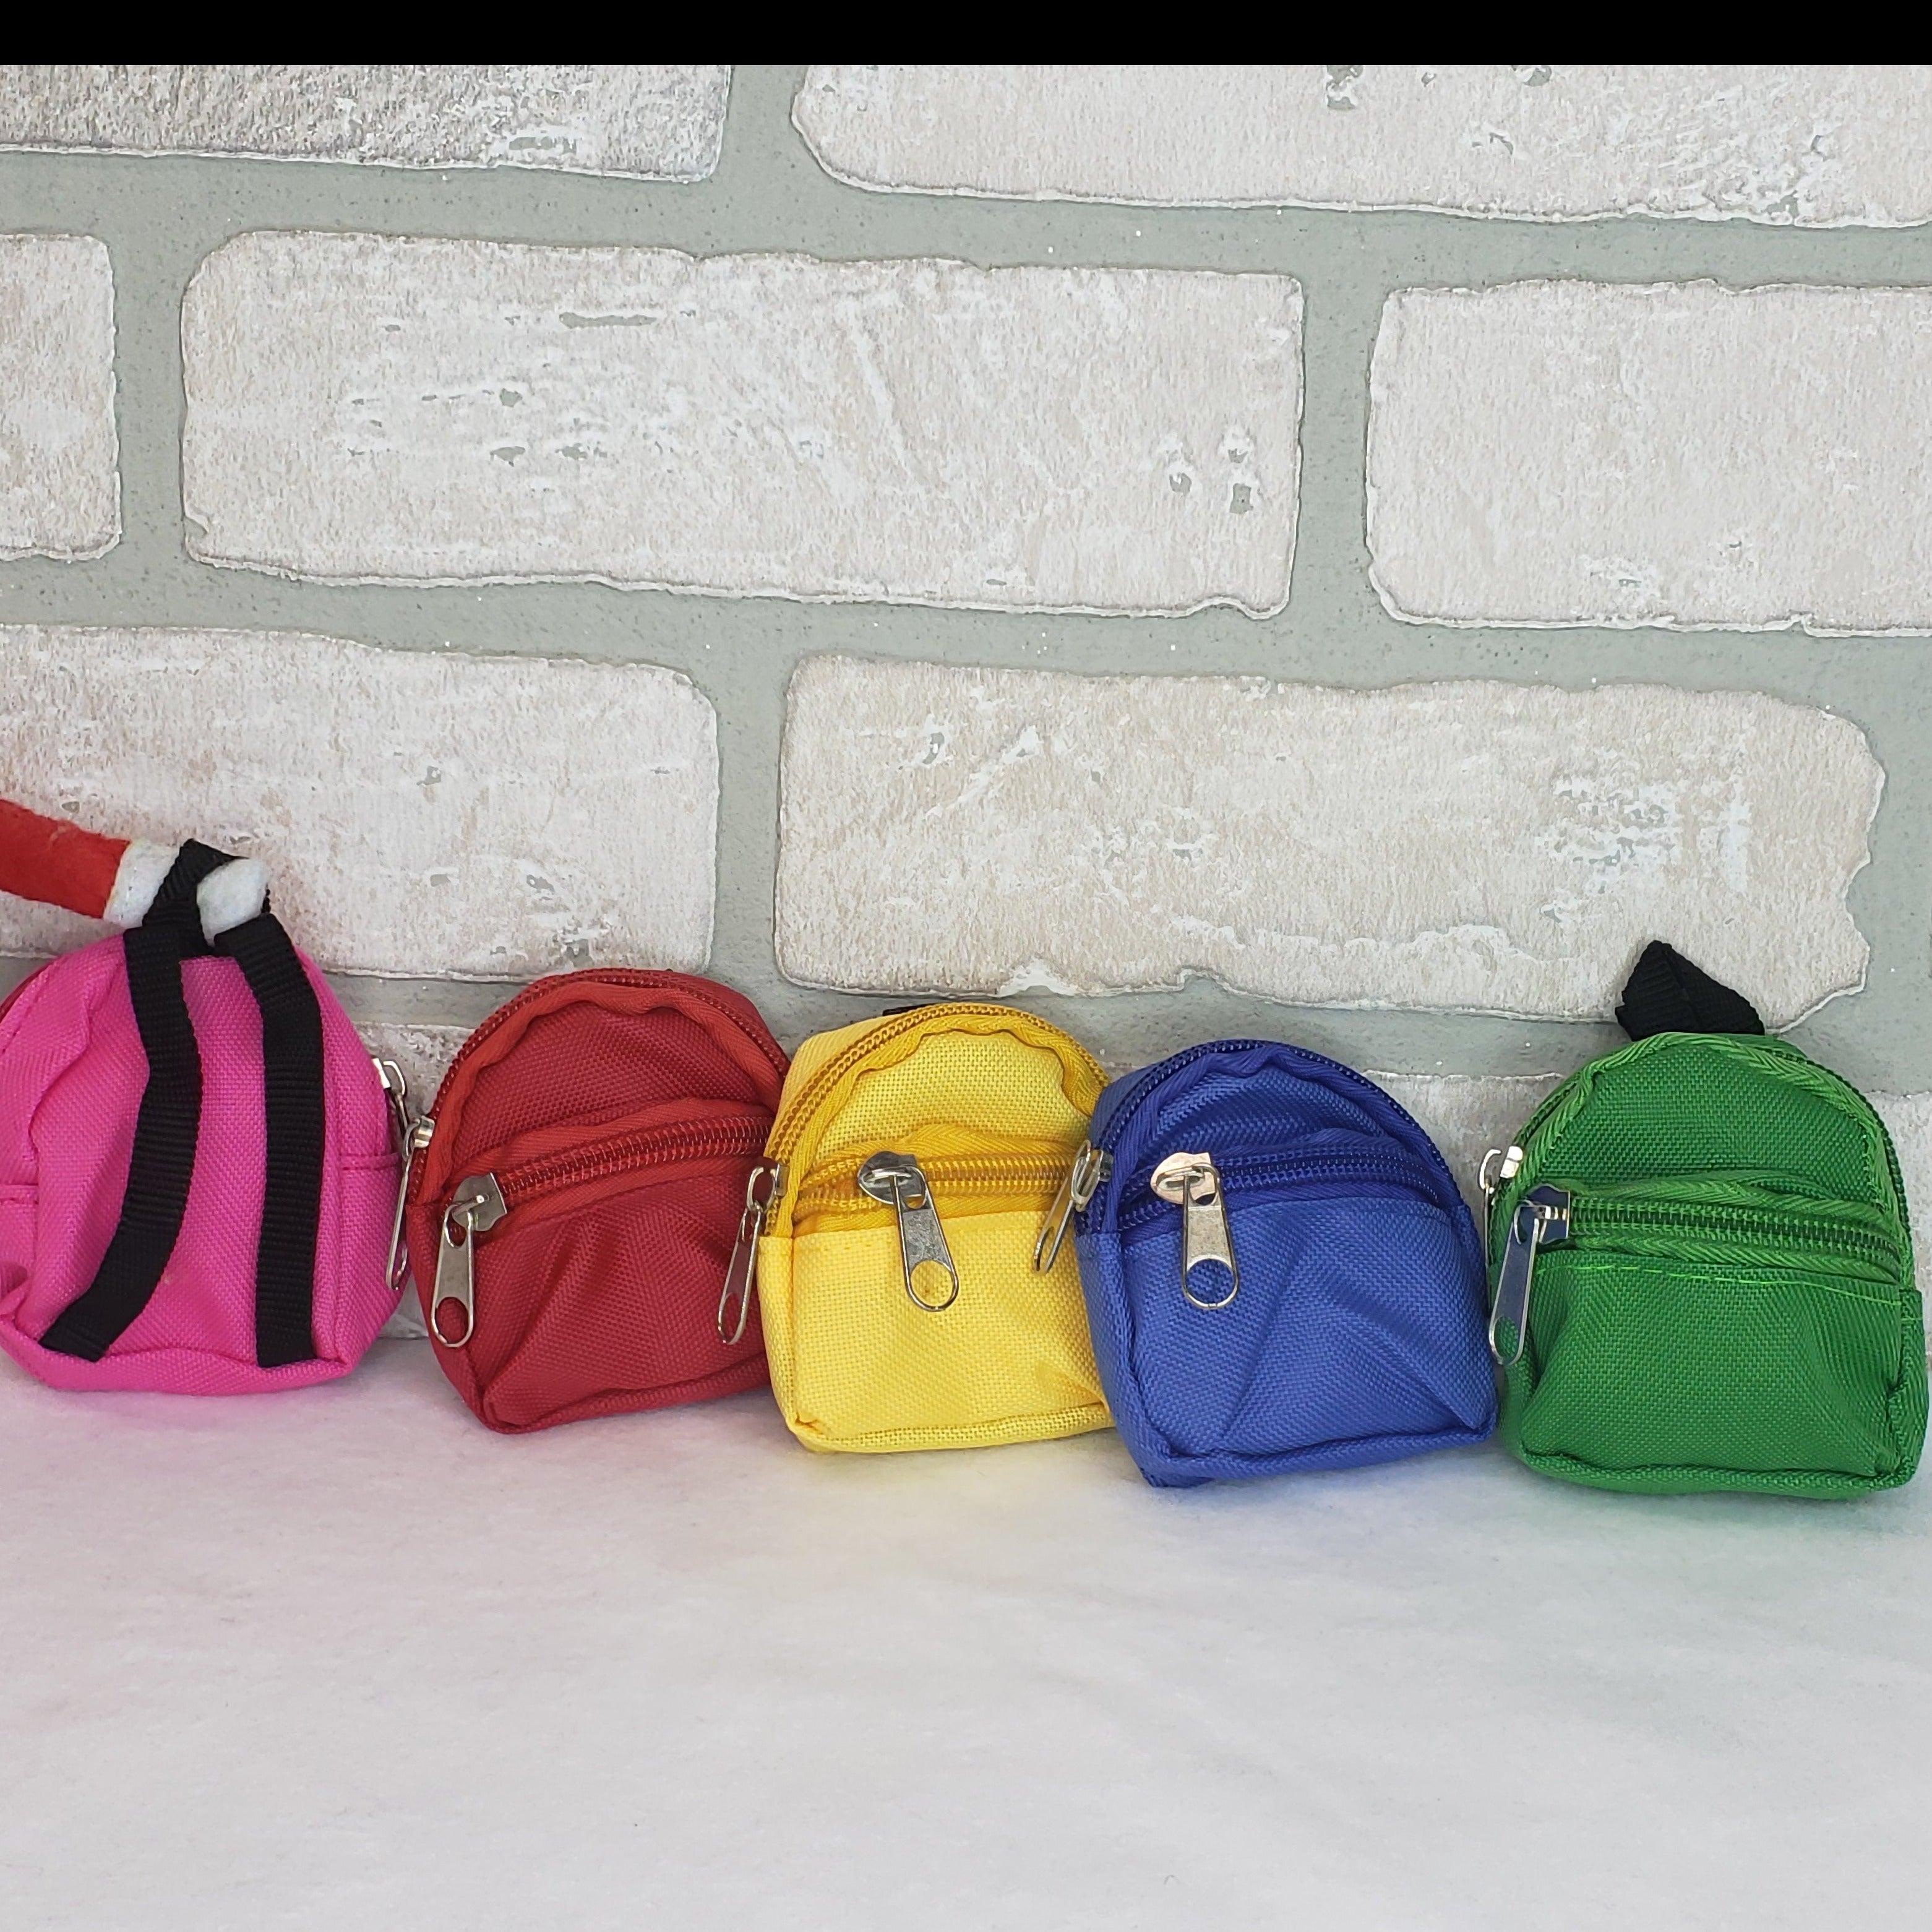 Elf backpacks - various colors available